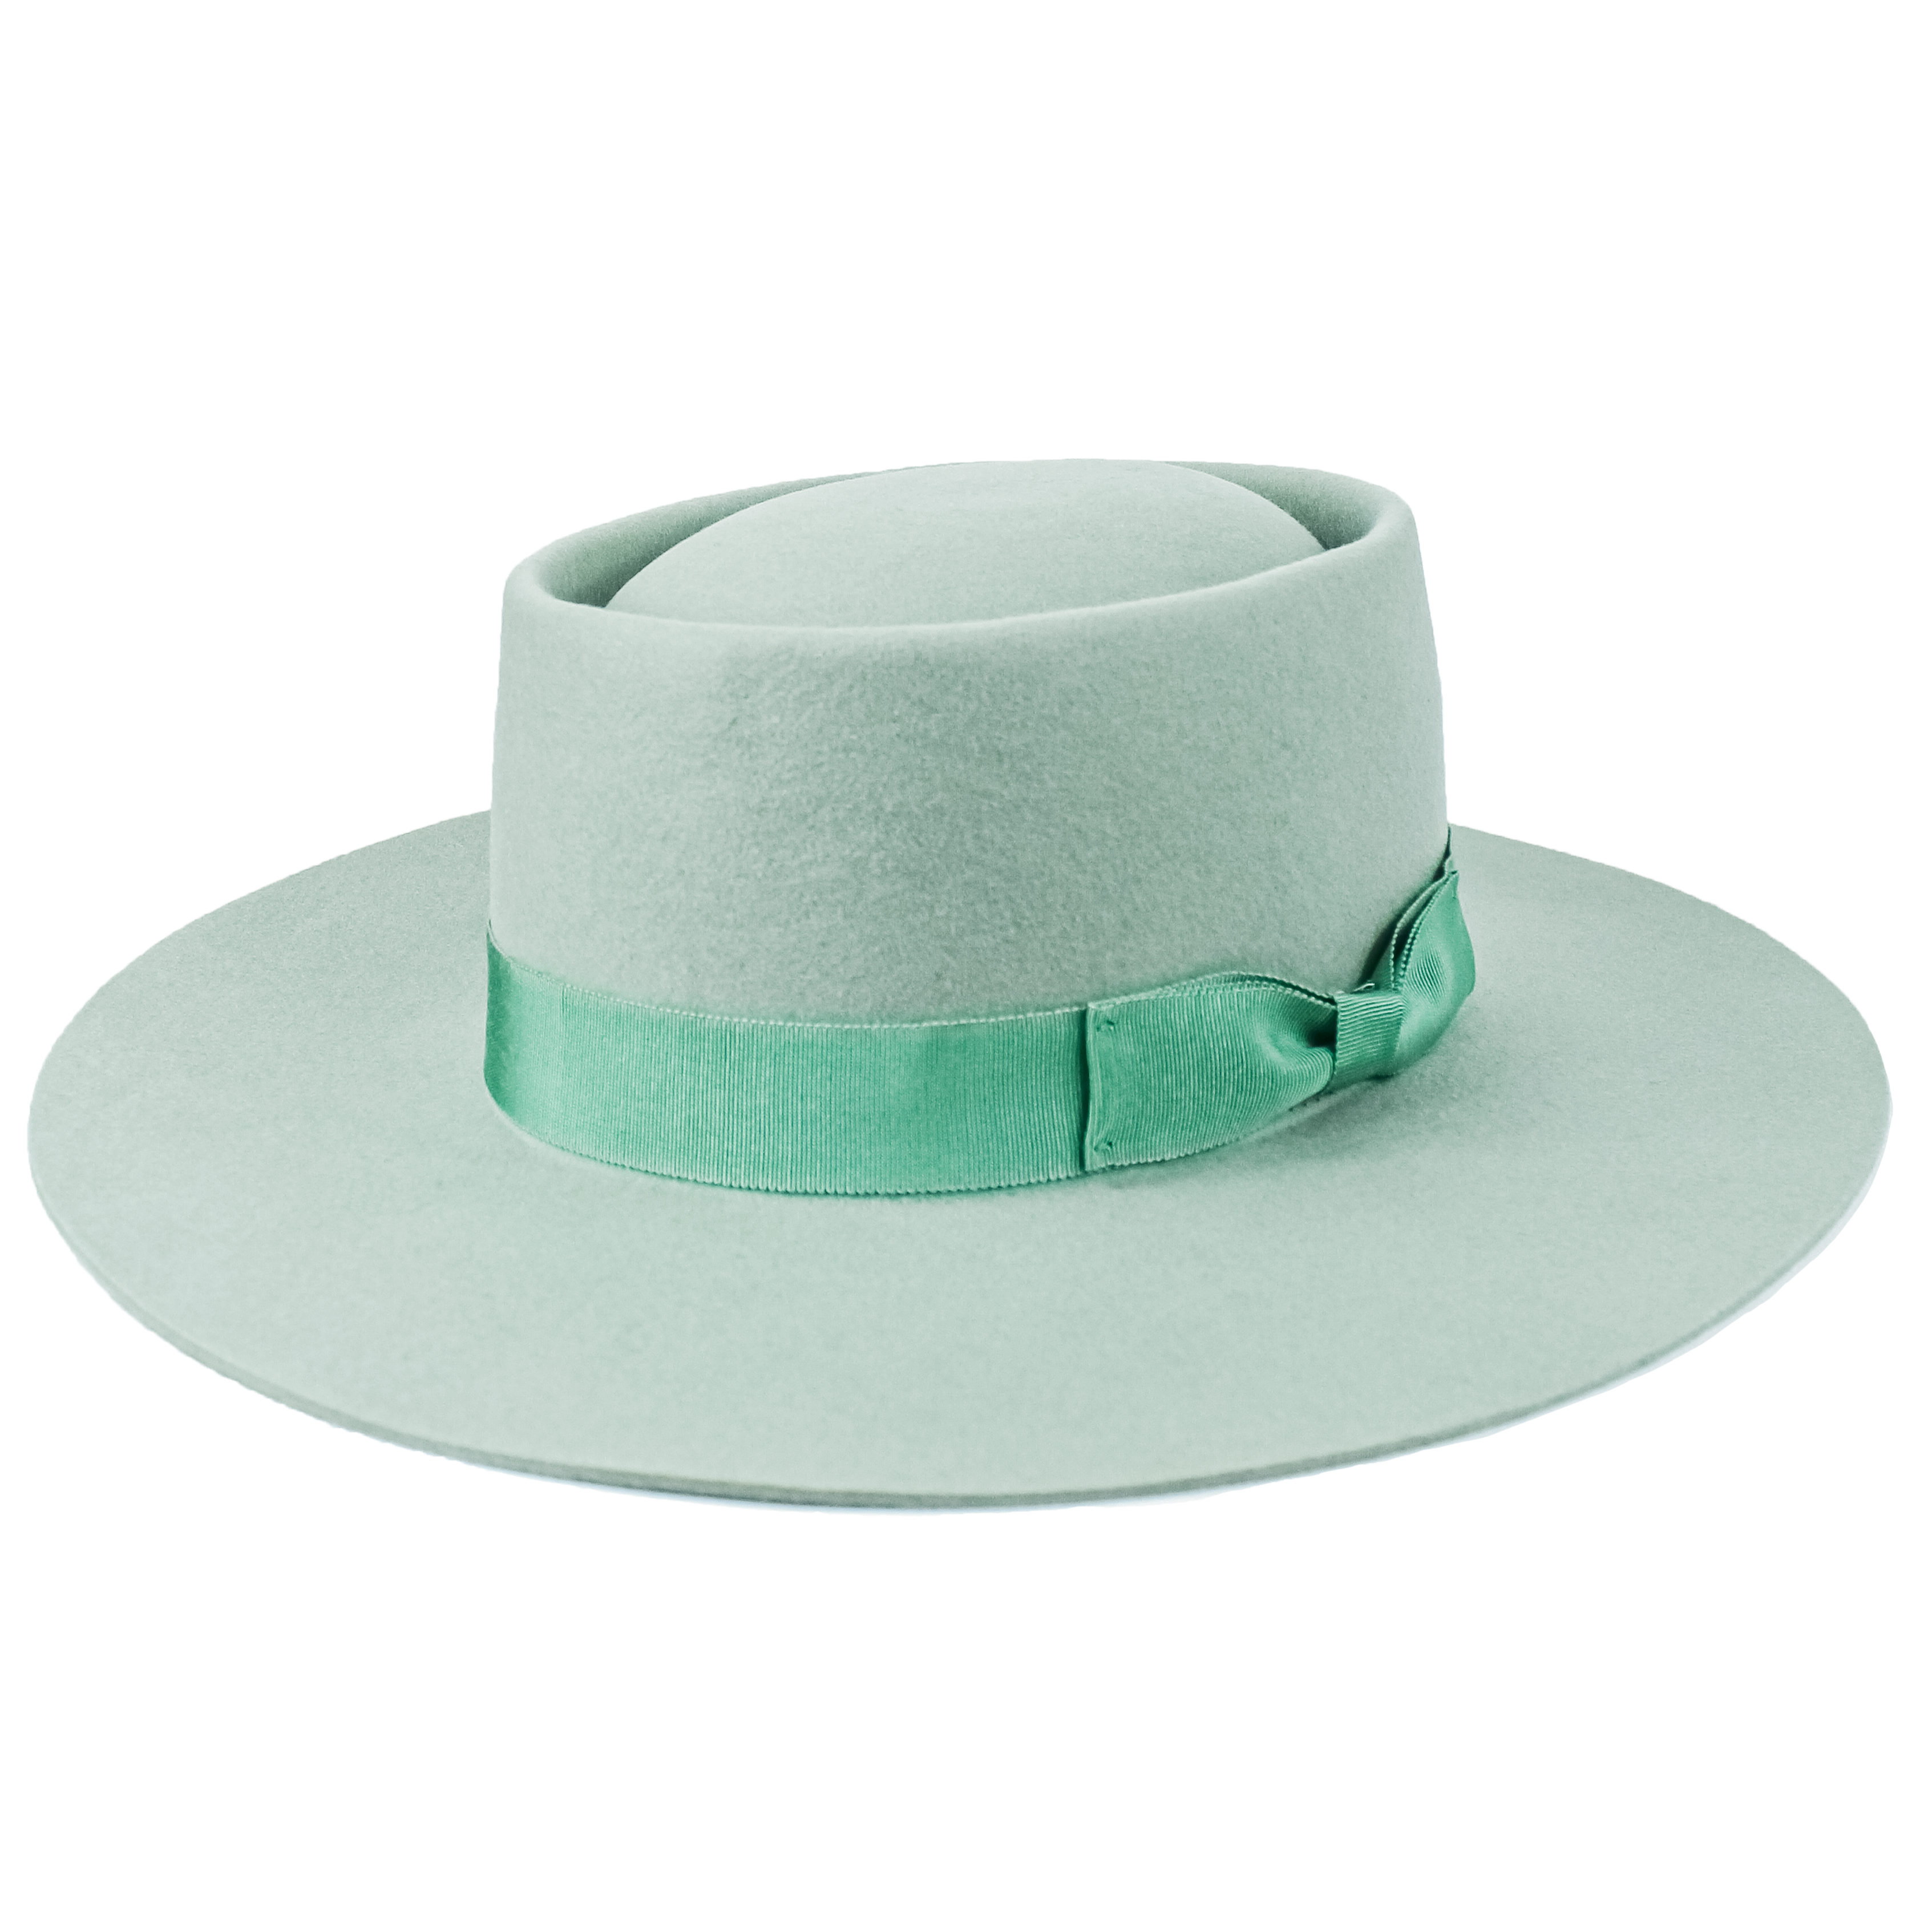 stylish kayo boater hat in mint green